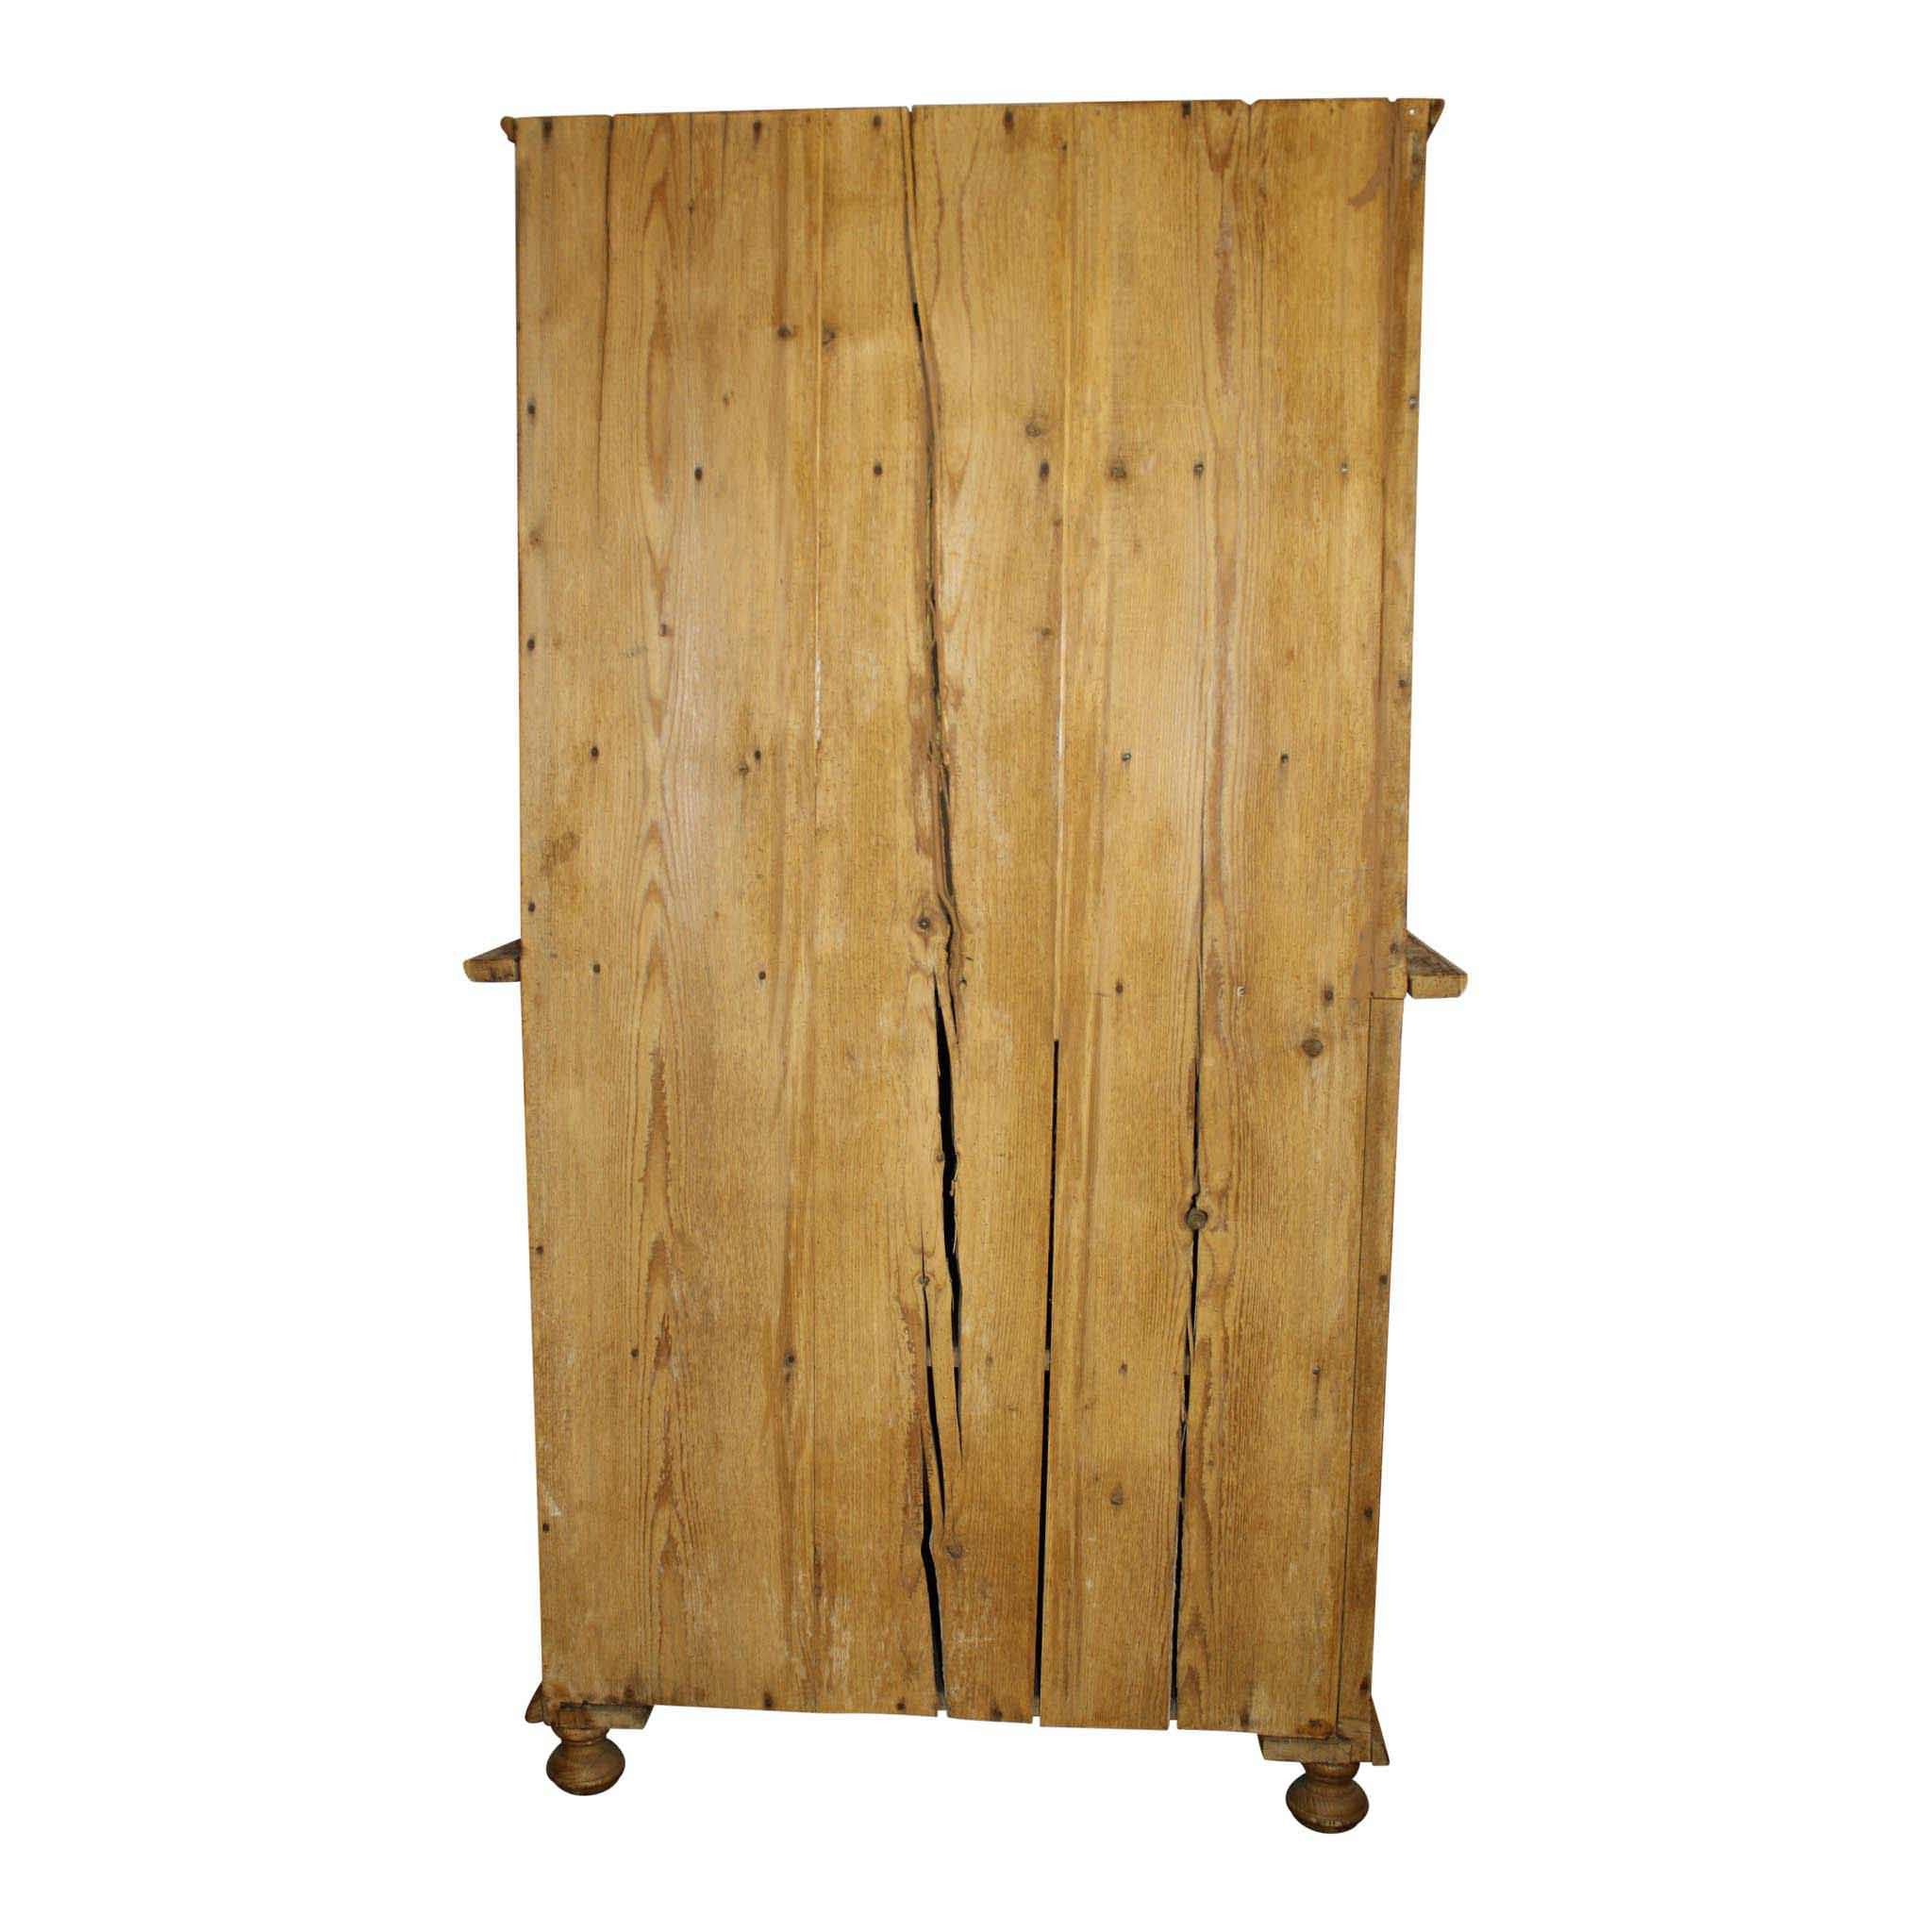 Pine Hutch with Plate Rack